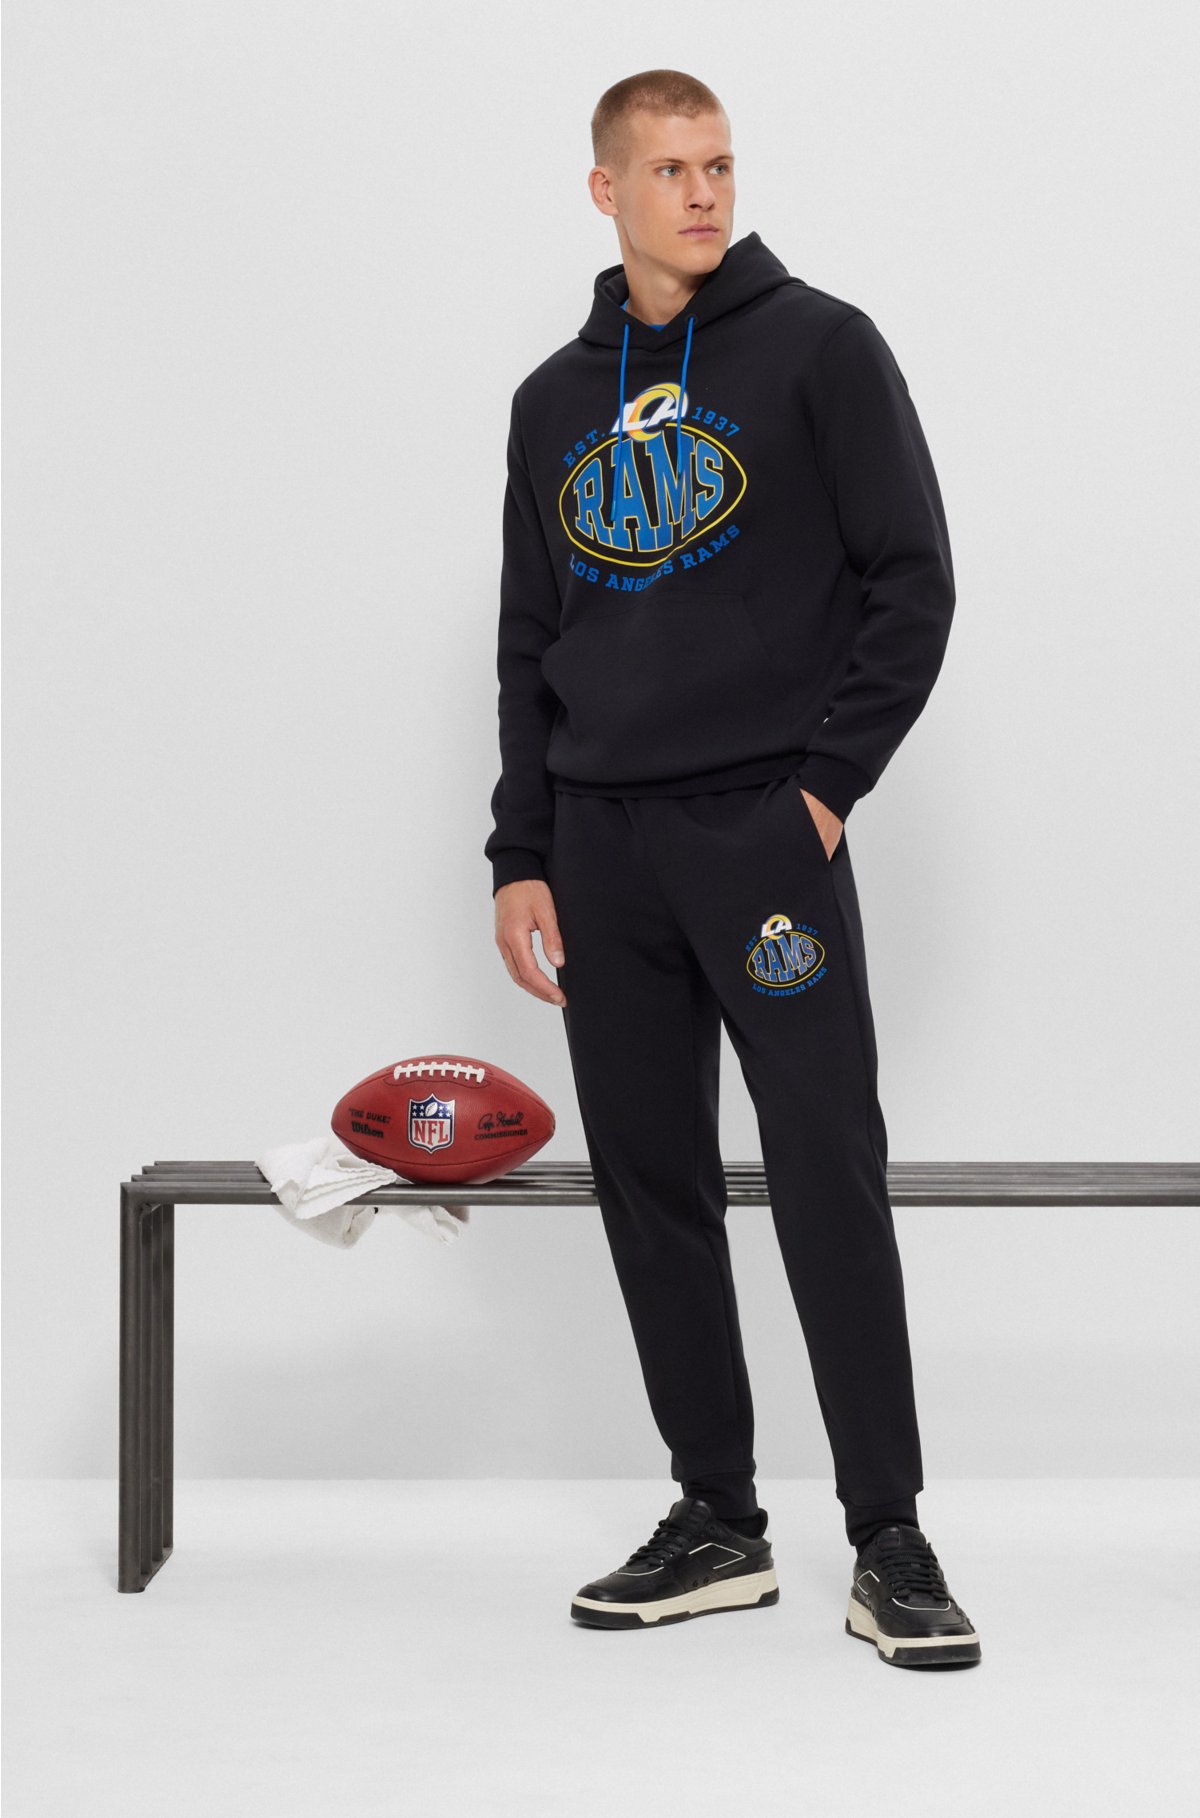  BOSS x NFL cotton-blend hoodie with collaborative branding, Rams